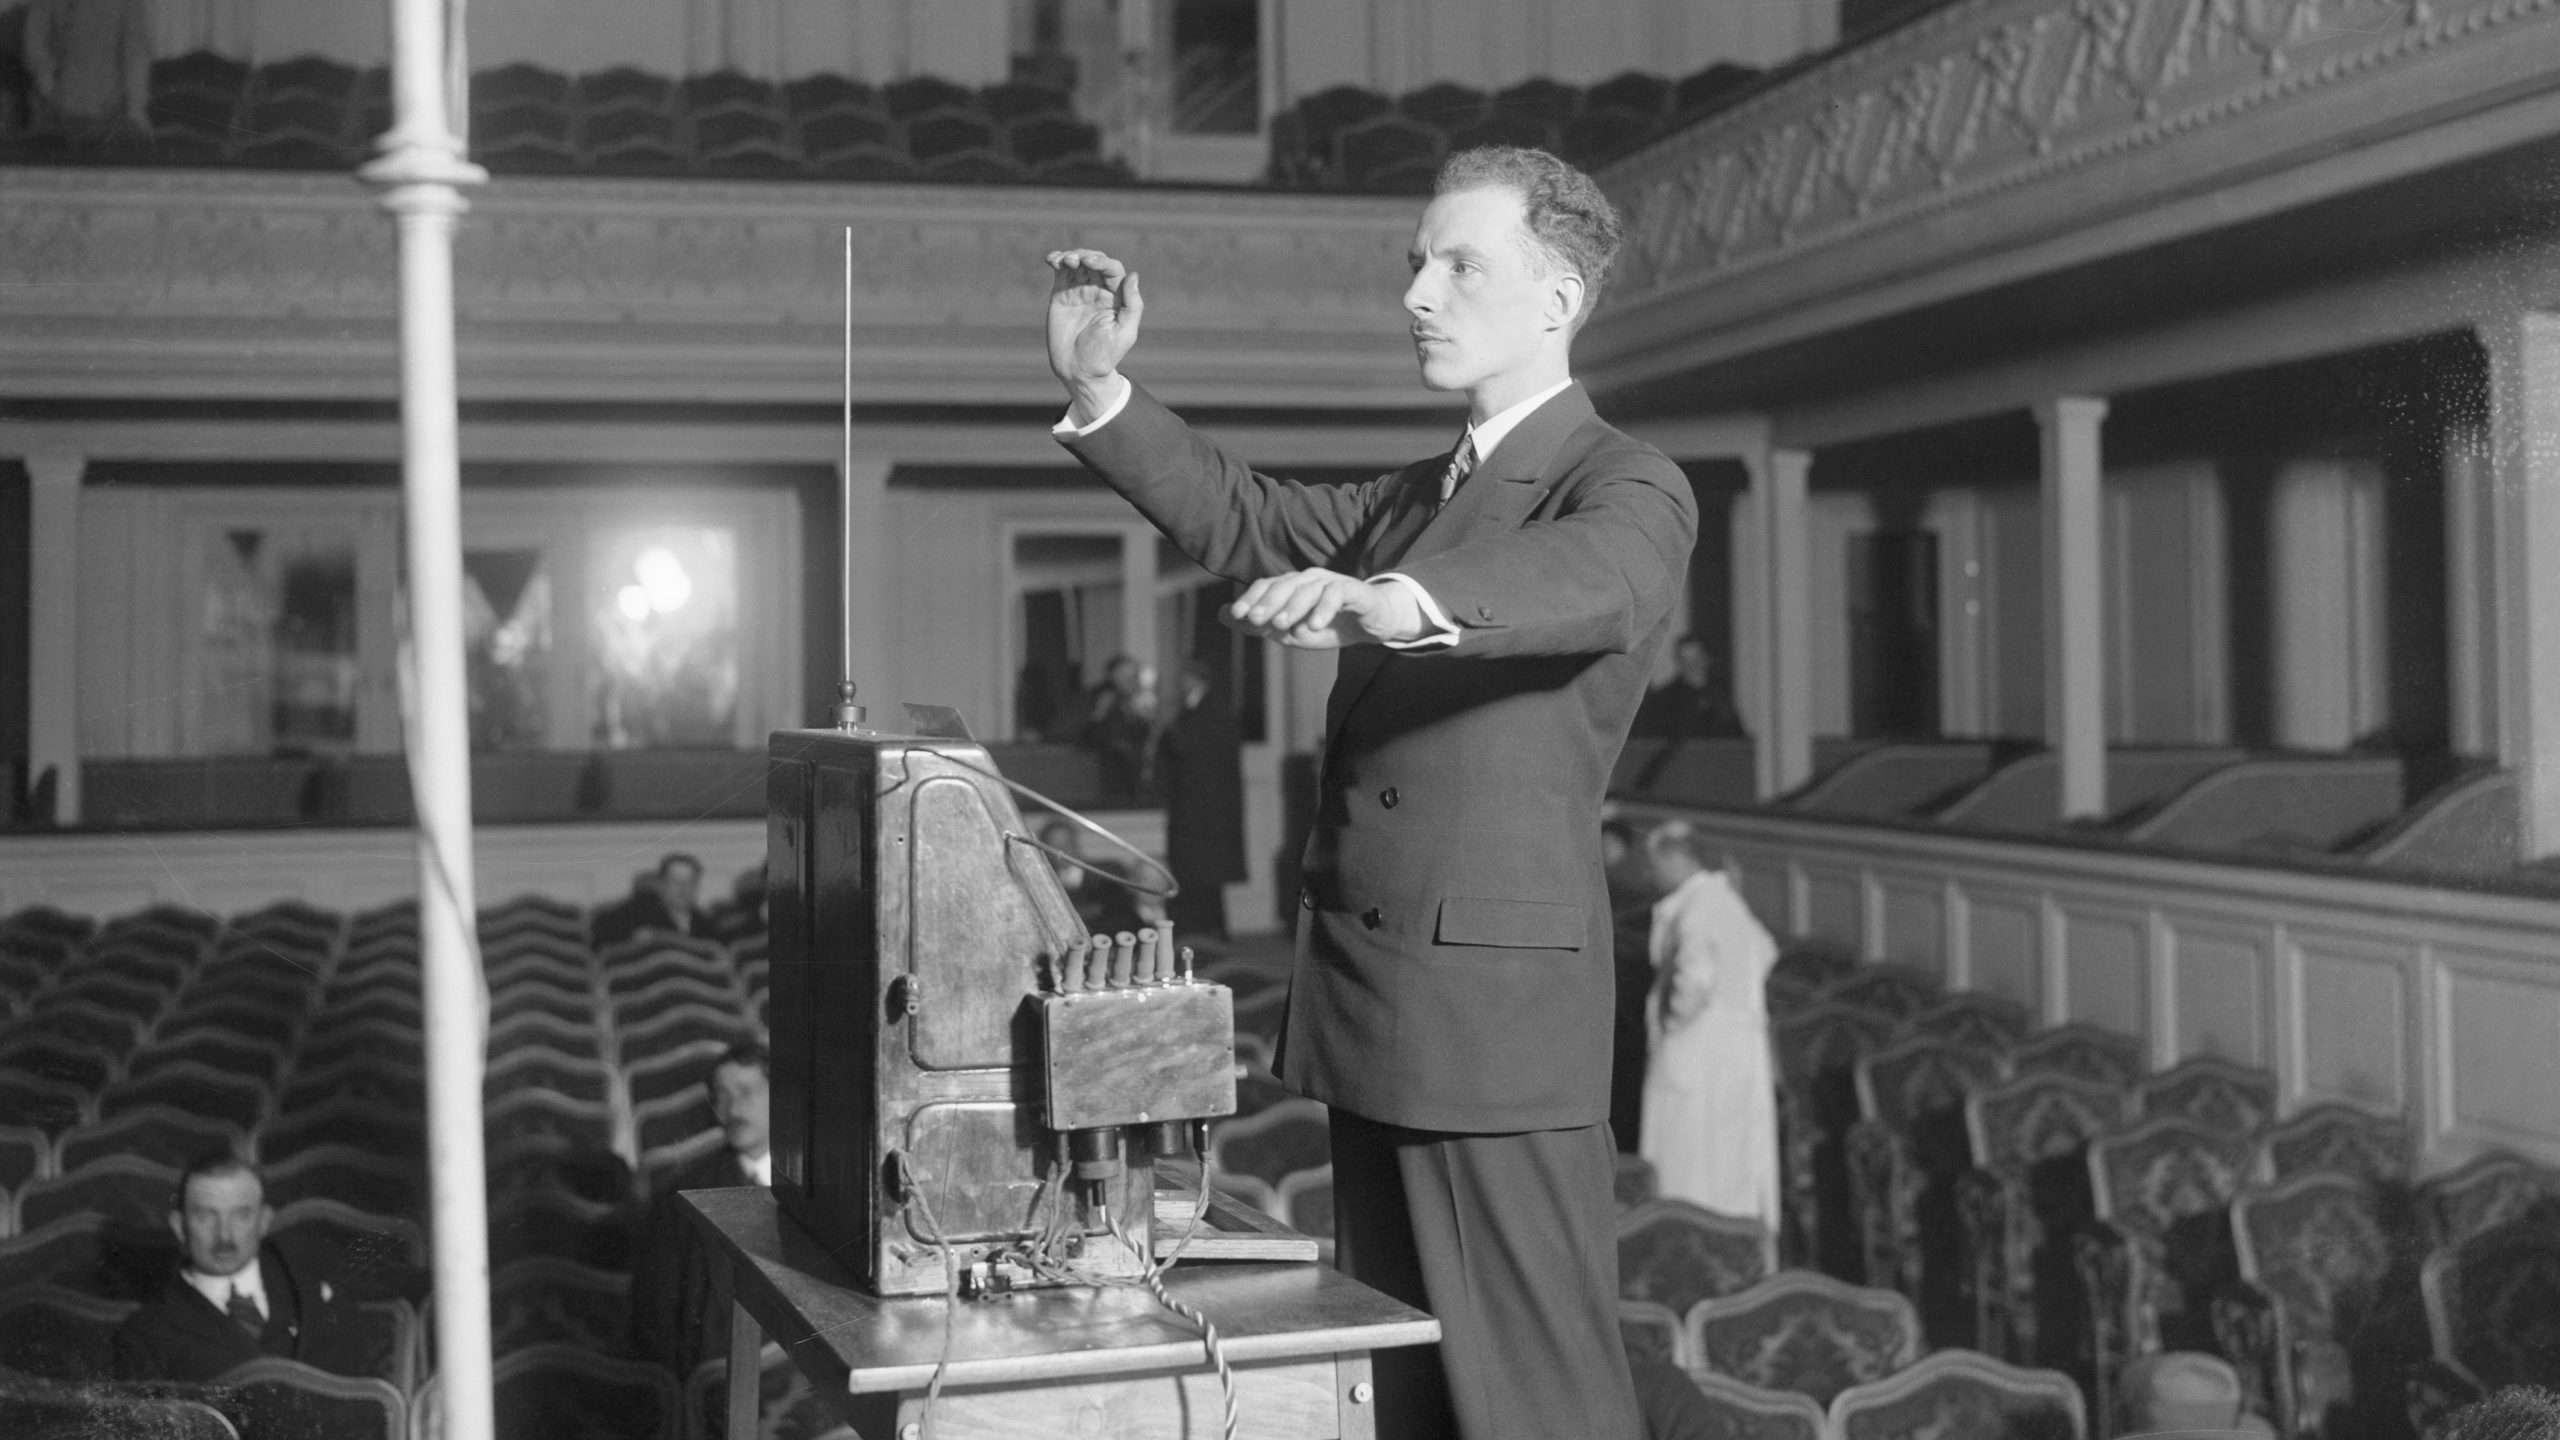 Moog Synthesizers on Twitter: "Born on this day in 1896, physicist and  inventor Leon Theremin has served as an inspiration to artists and  innovators for more than a century. His eponymous invention